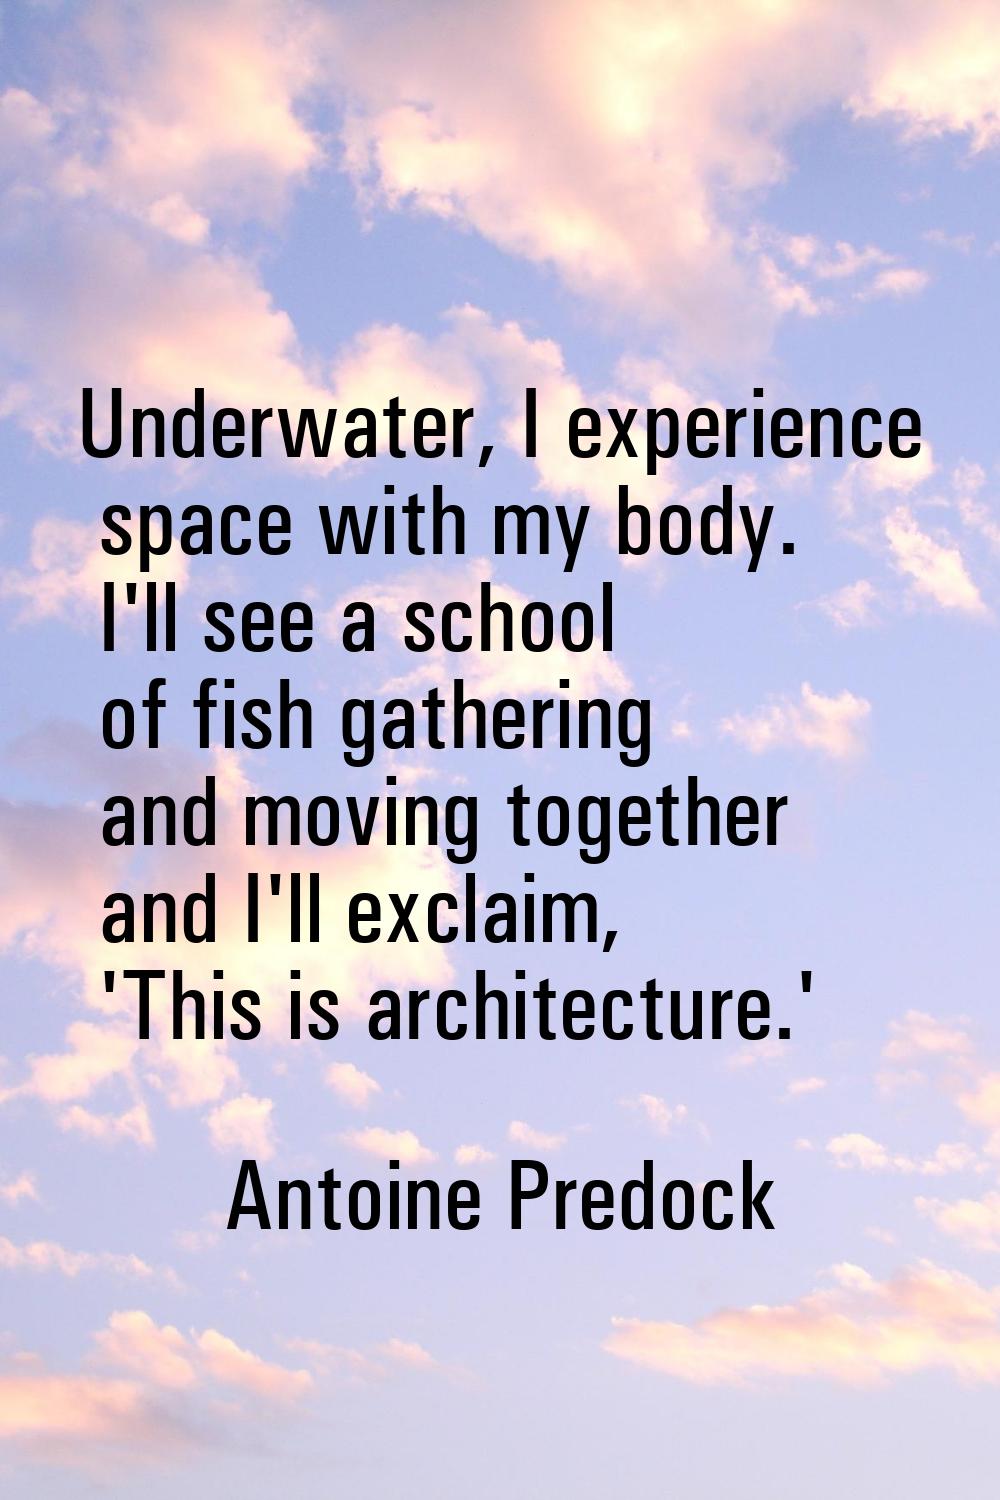 Underwater, I experience space with my body. I'll see a school of fish gathering and moving togethe